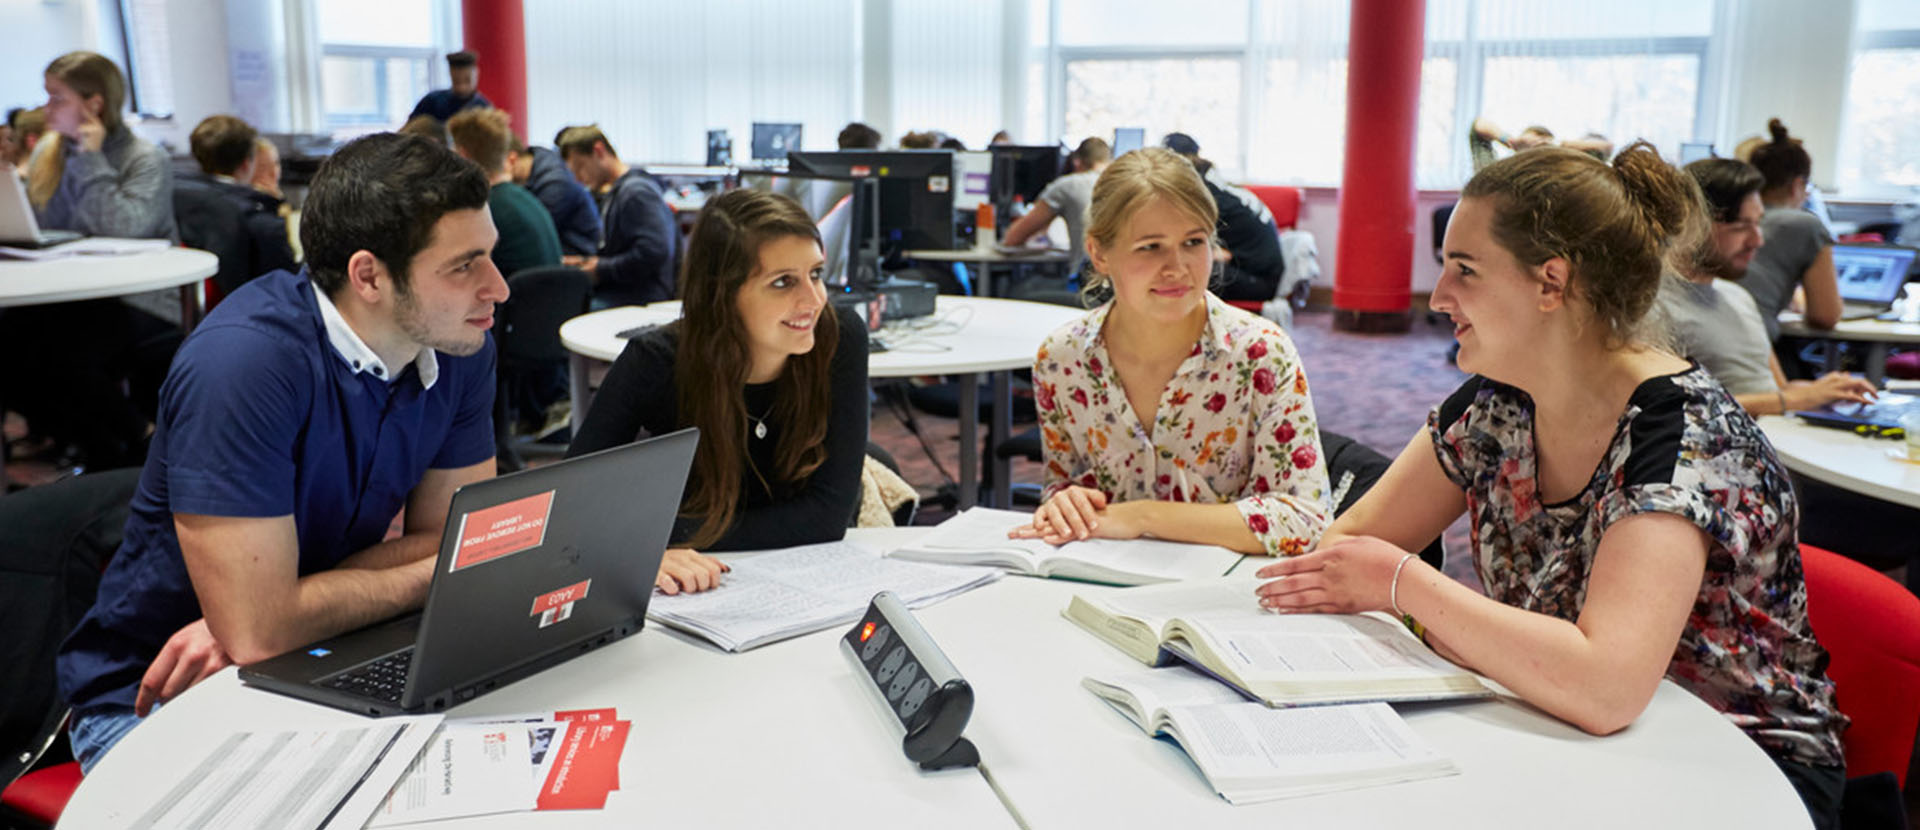 Solent students working in the library